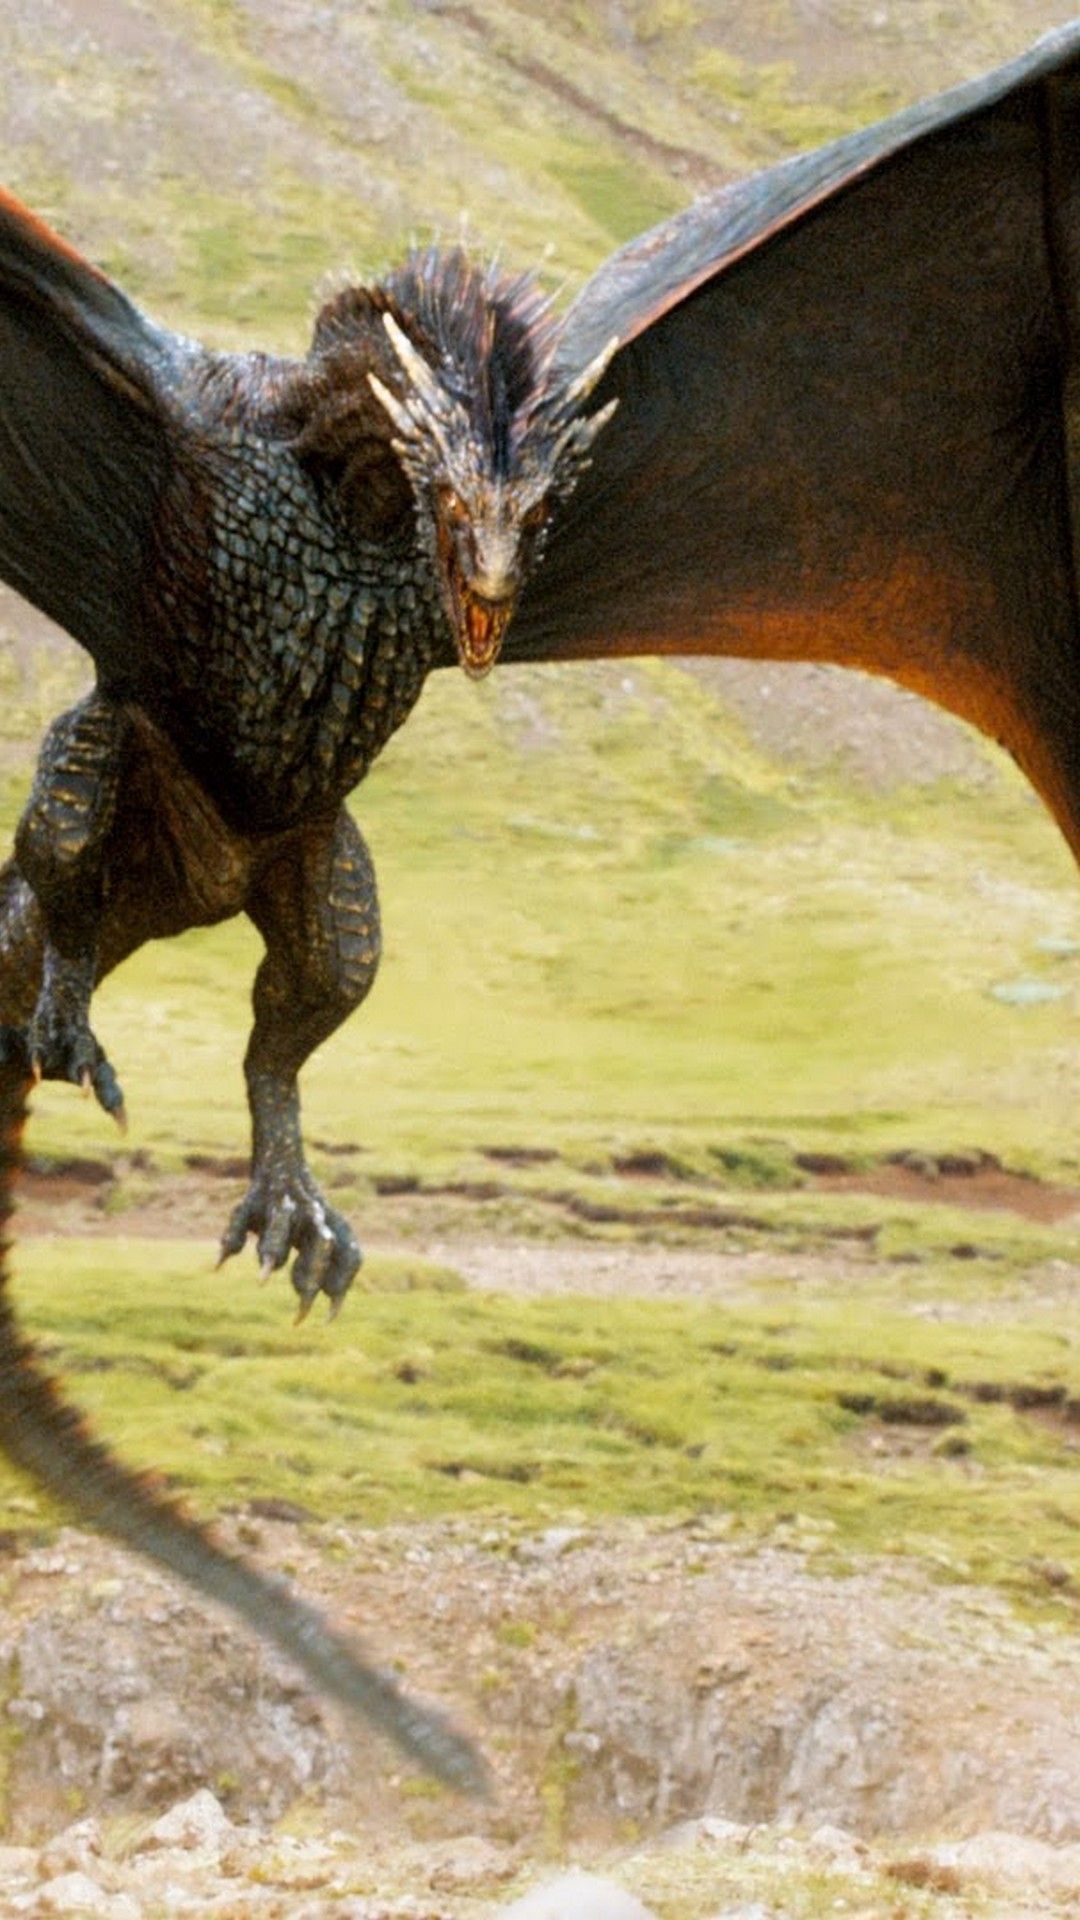 Game of Thrones Dragons Wallpaper iPhone iPhone Wallpaper. Game of thrones dragons, Drogon game of thrones, Dragon wallpaper iphone